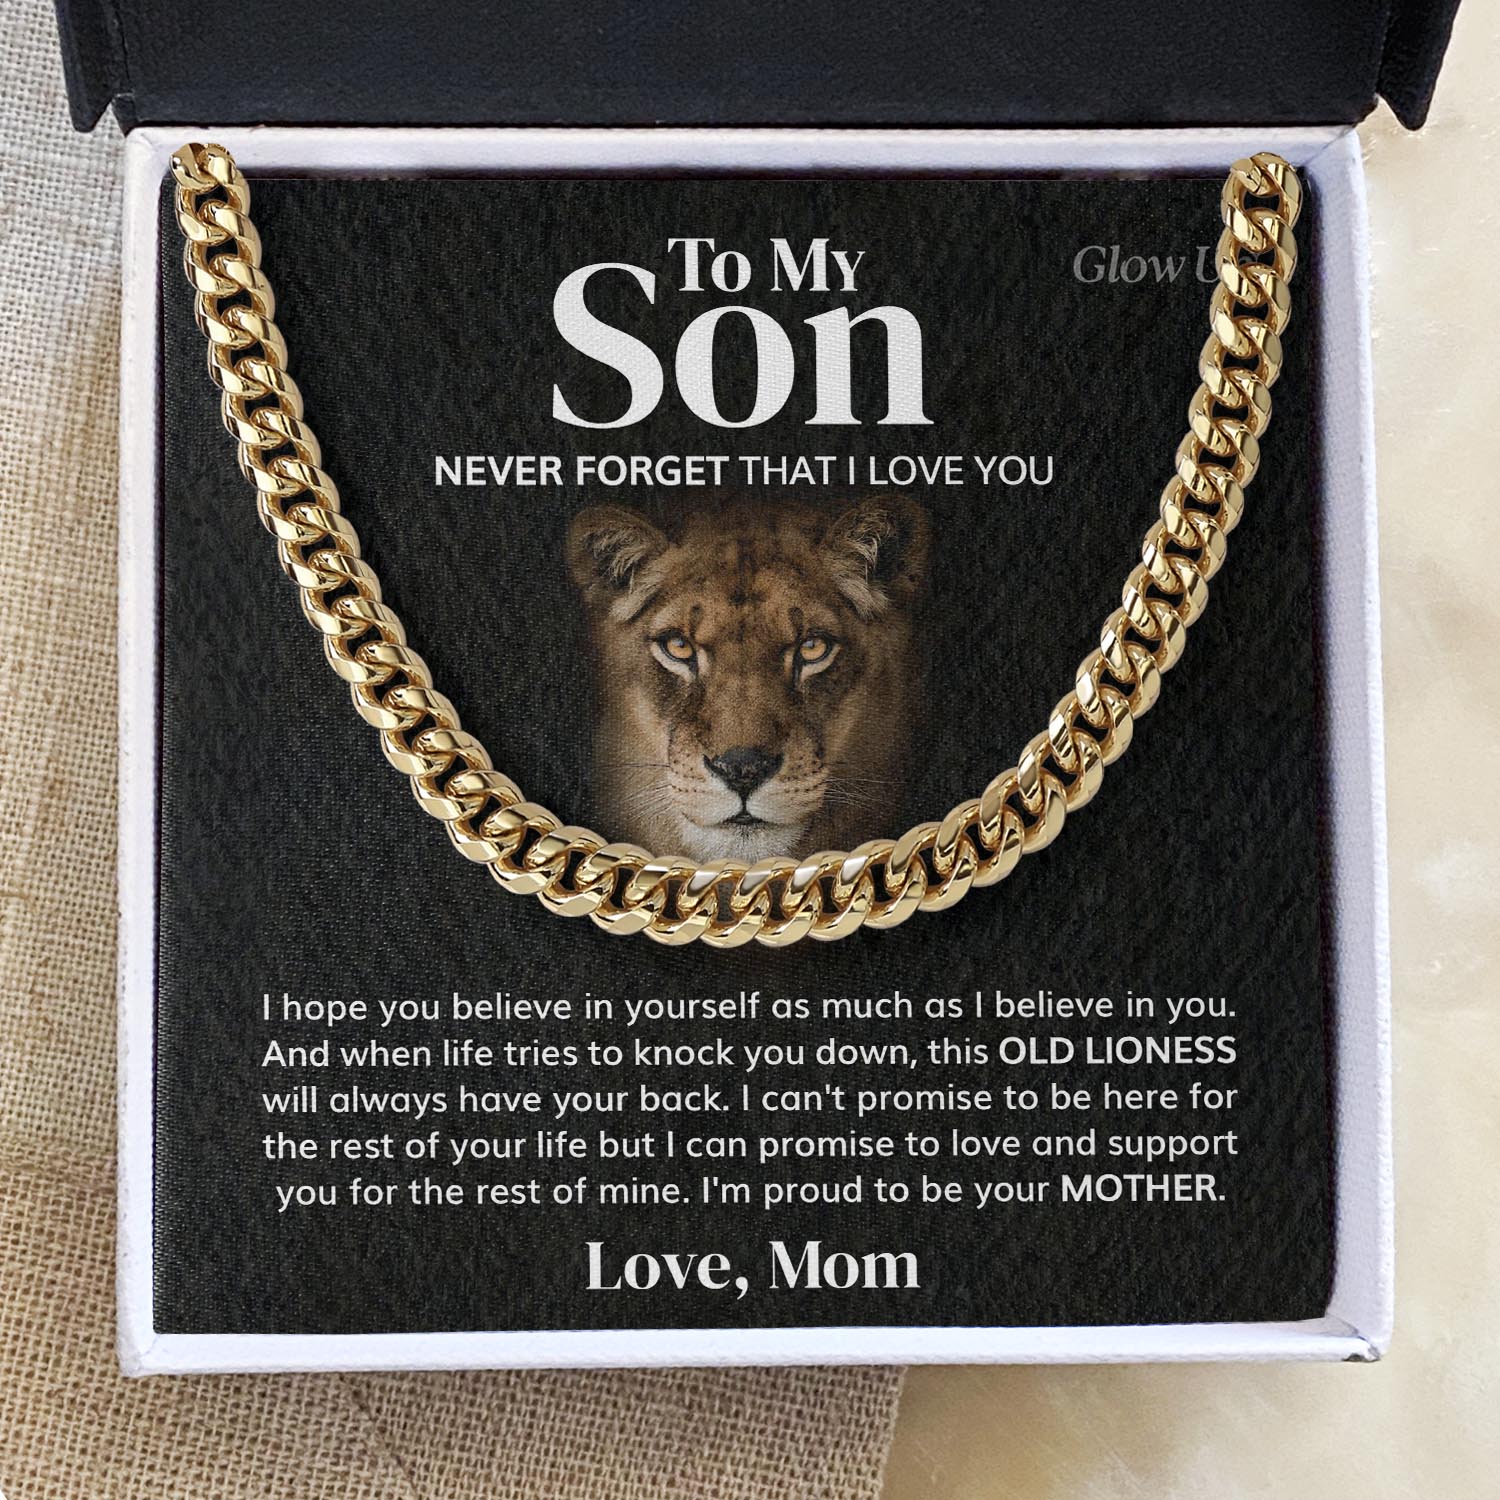 ShineOn Fulfillment Jewelry 14K Yellow Gold Finish / Two-Toned Box To my Son - Old Lioness - Cuban Link Chain